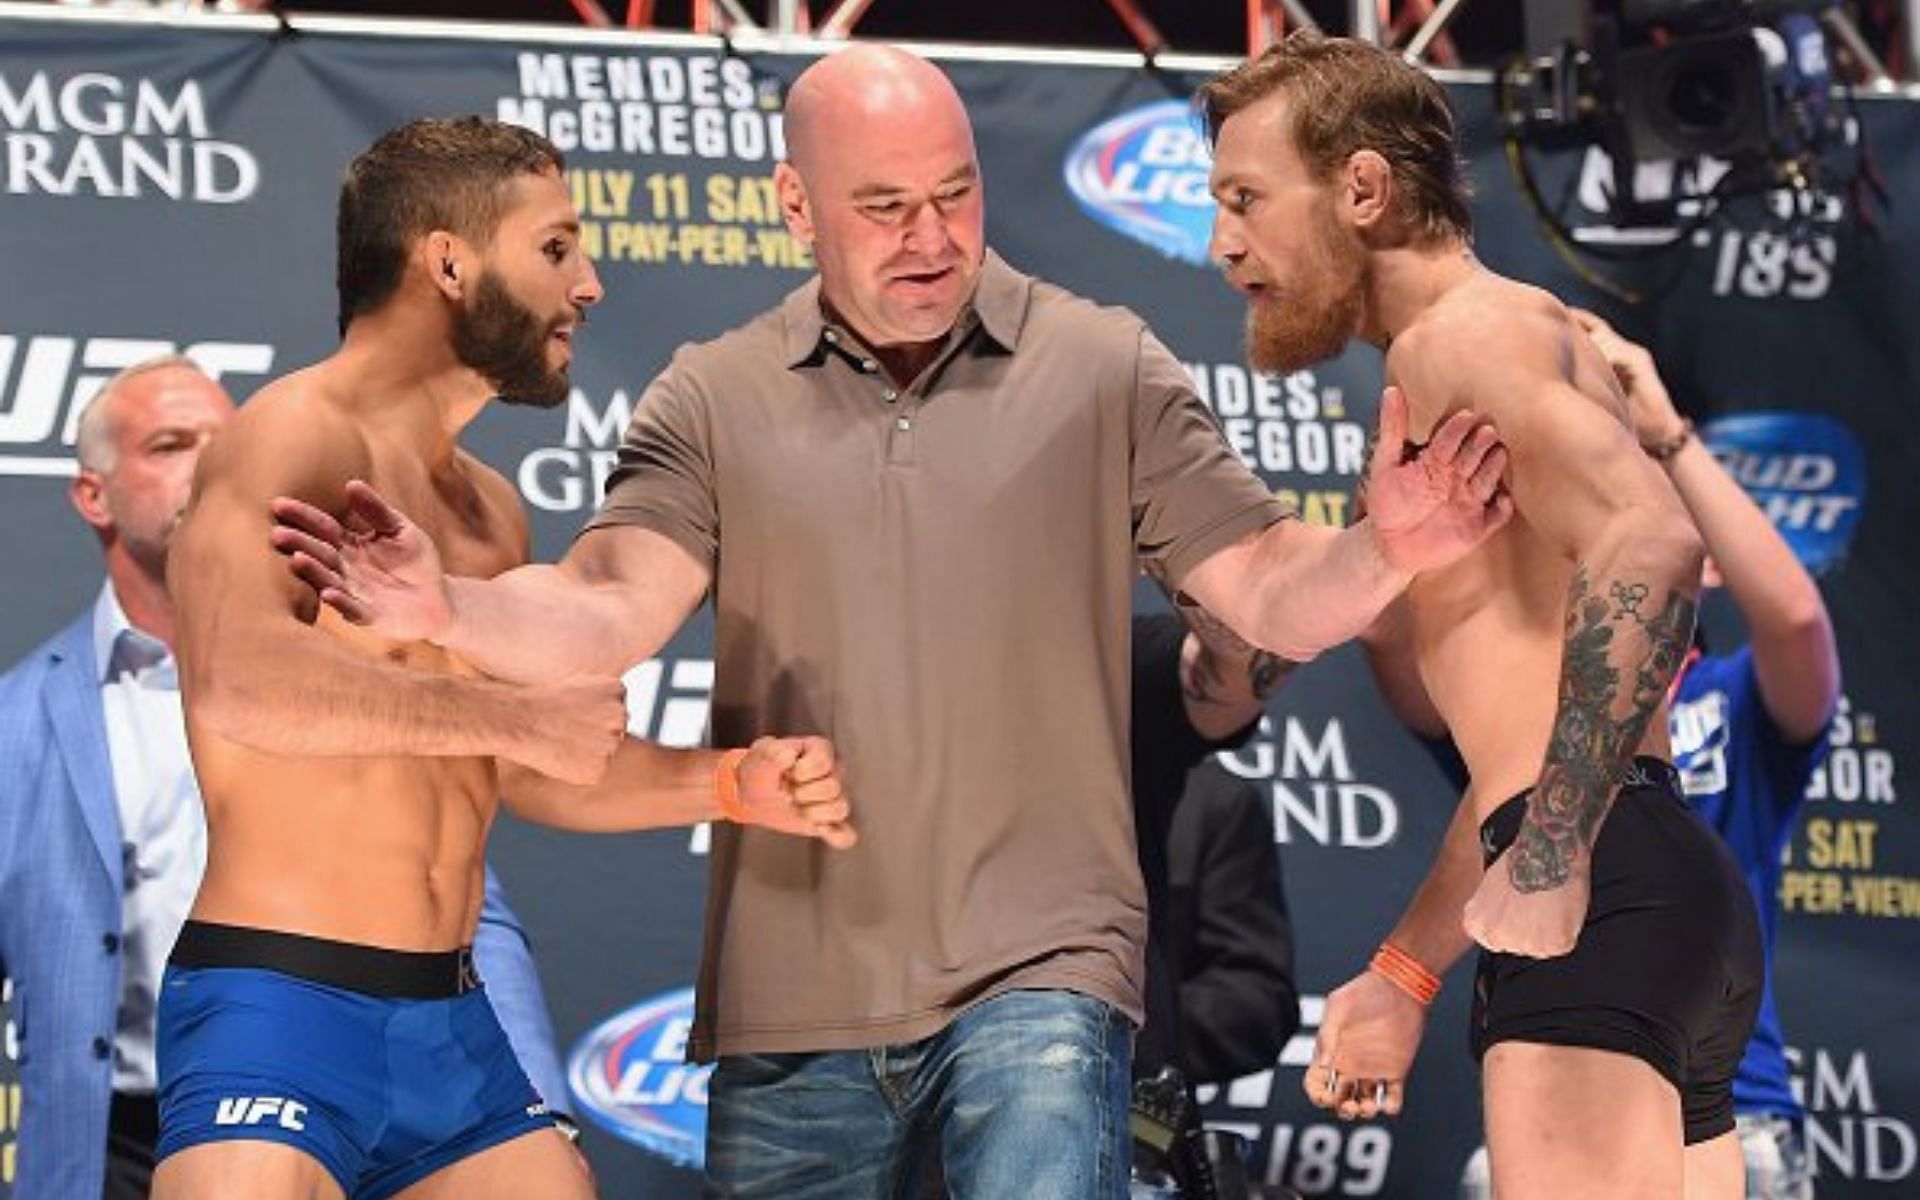 Chad Mendes (left) Conor McGregor (right) facing off before their historic fight